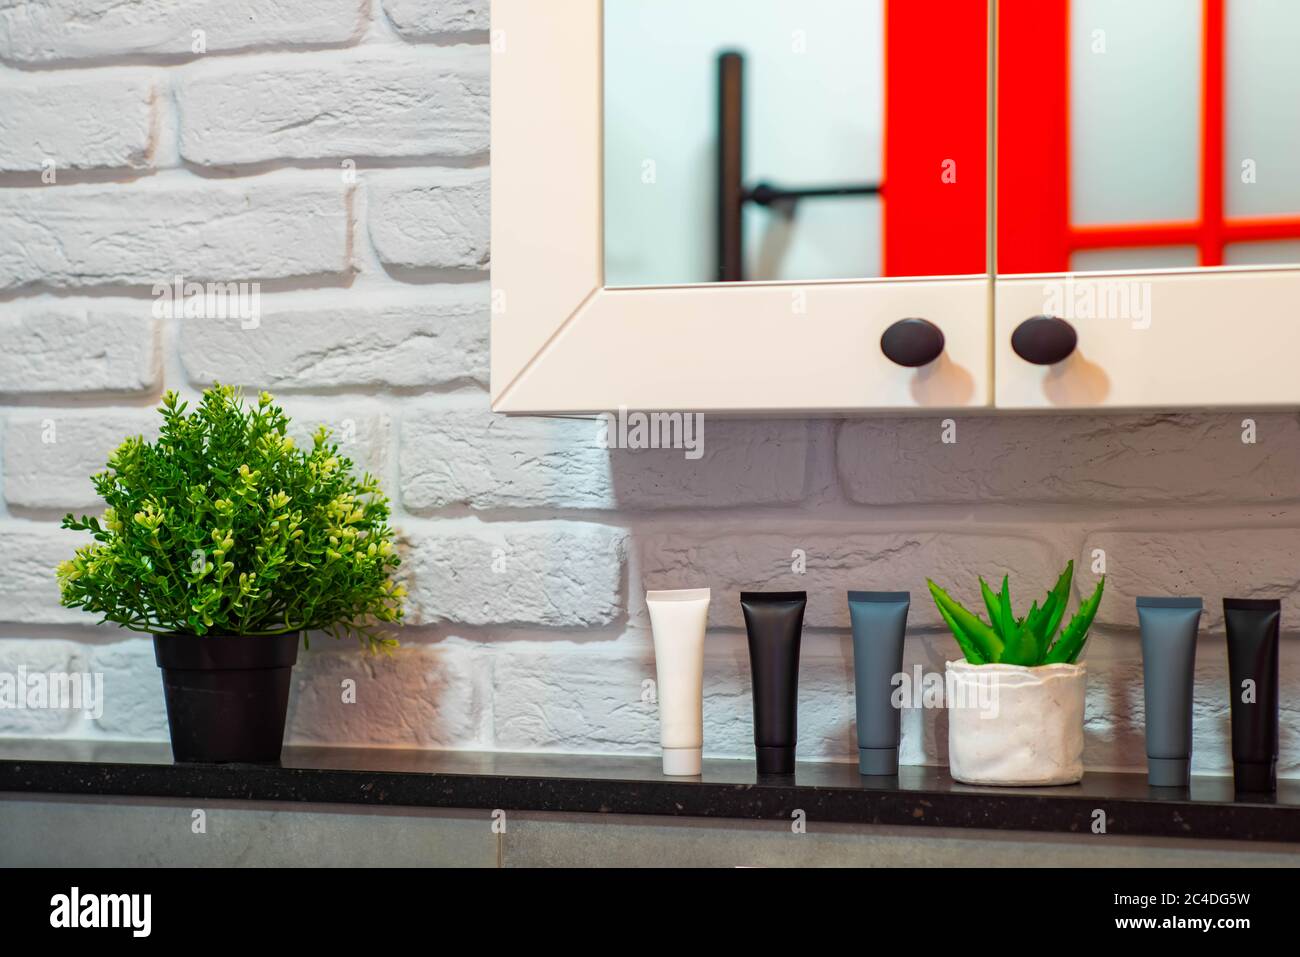 Close-up of shelf with decorative flower, cosmetics and hygiene gels. Loft interior of bathroom. Brick wall. Cabinet with mirror. Stock Photo